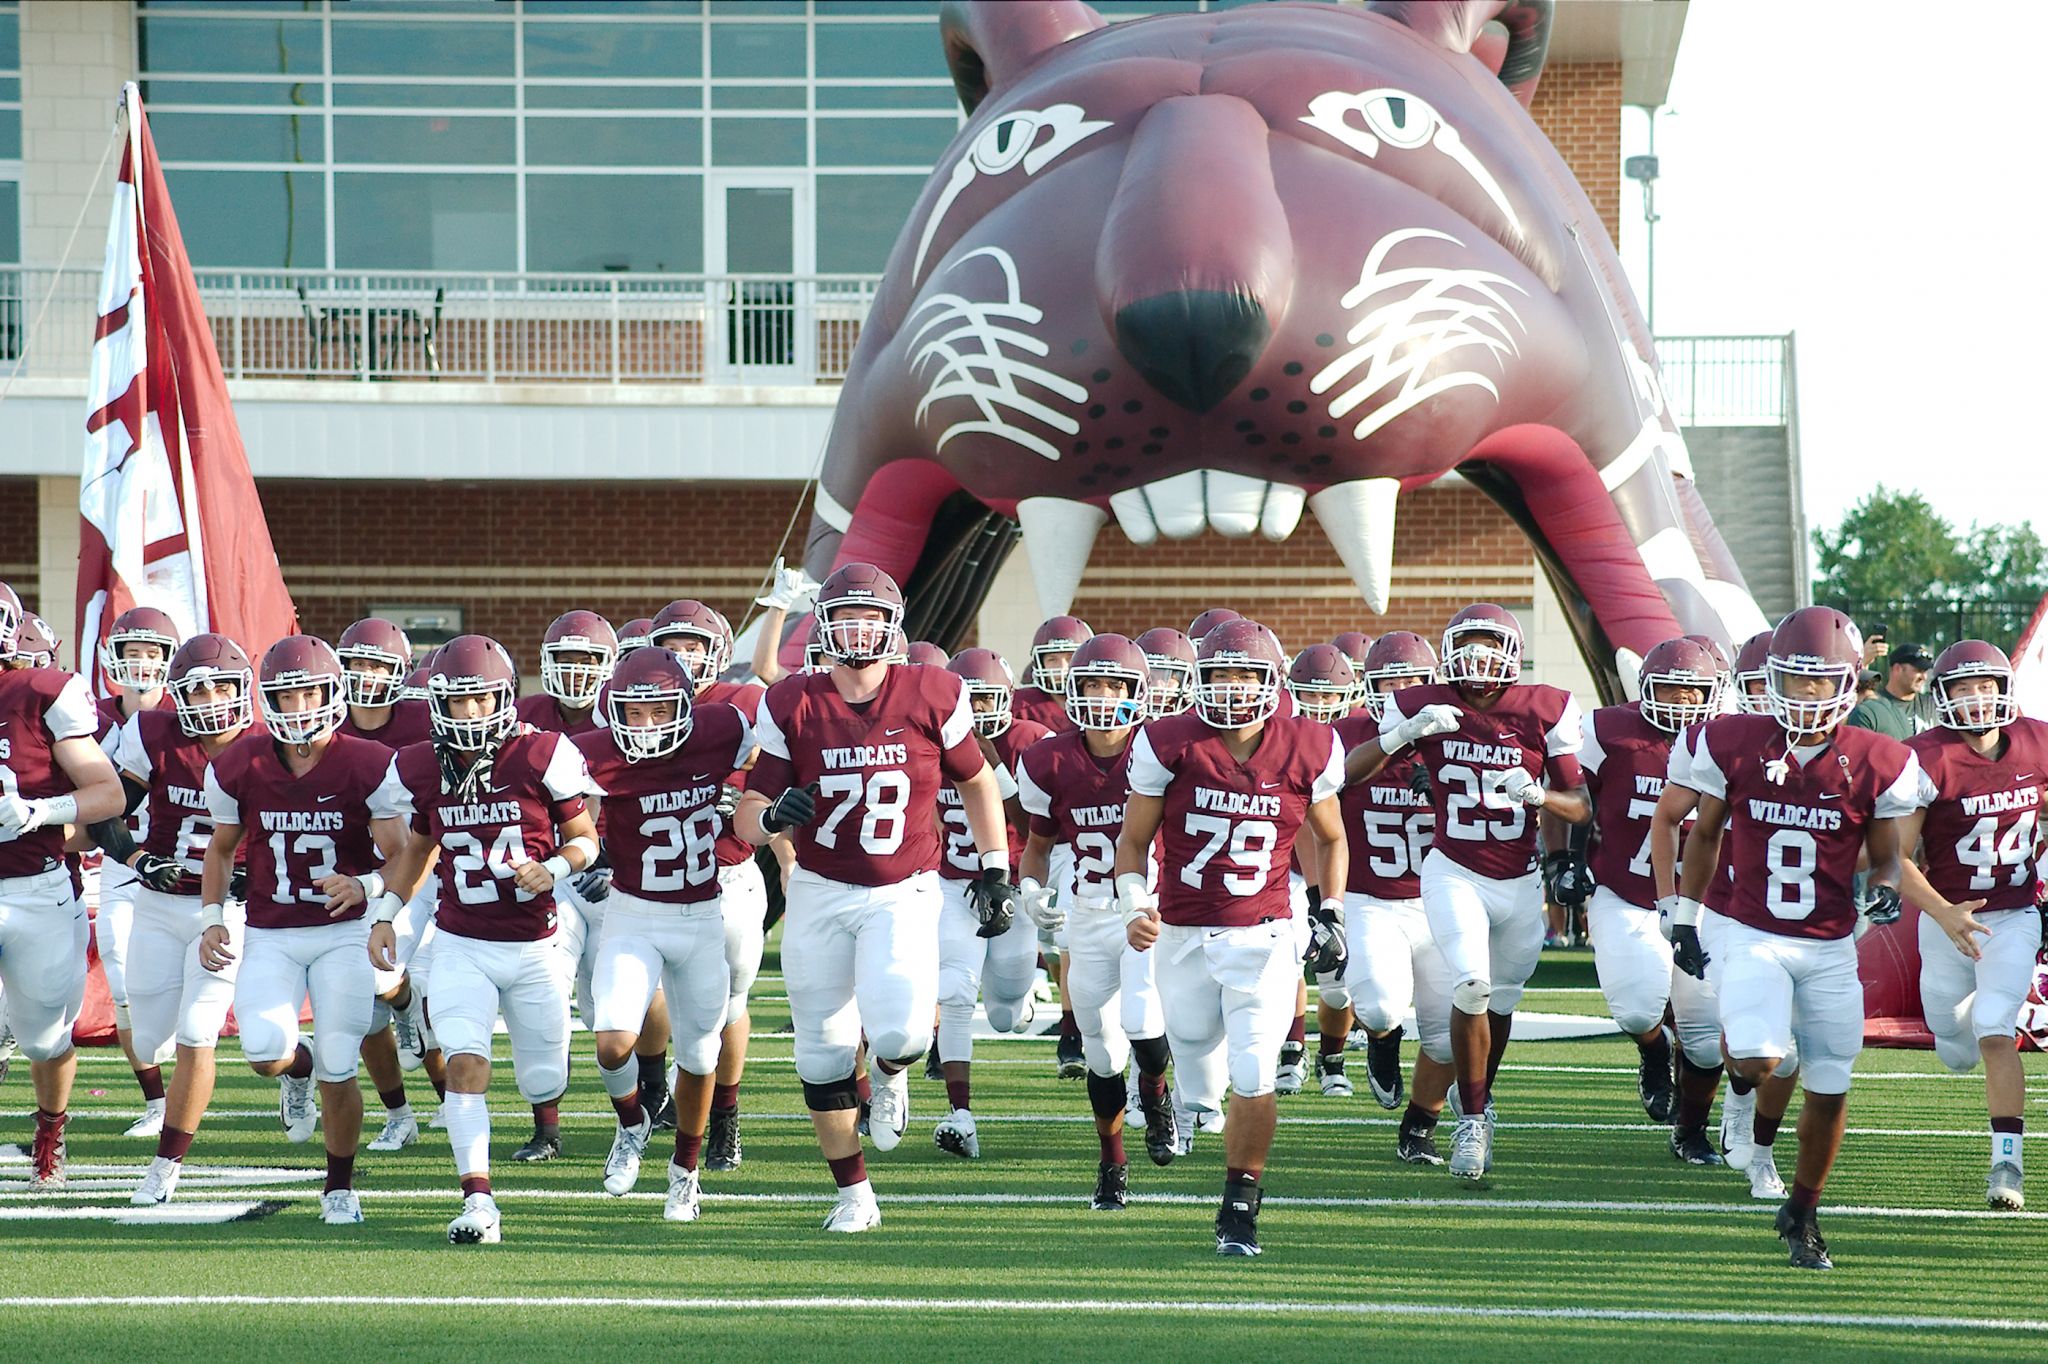 Football quiz: Can you name all the mascots for Clear Creek ISD teams?